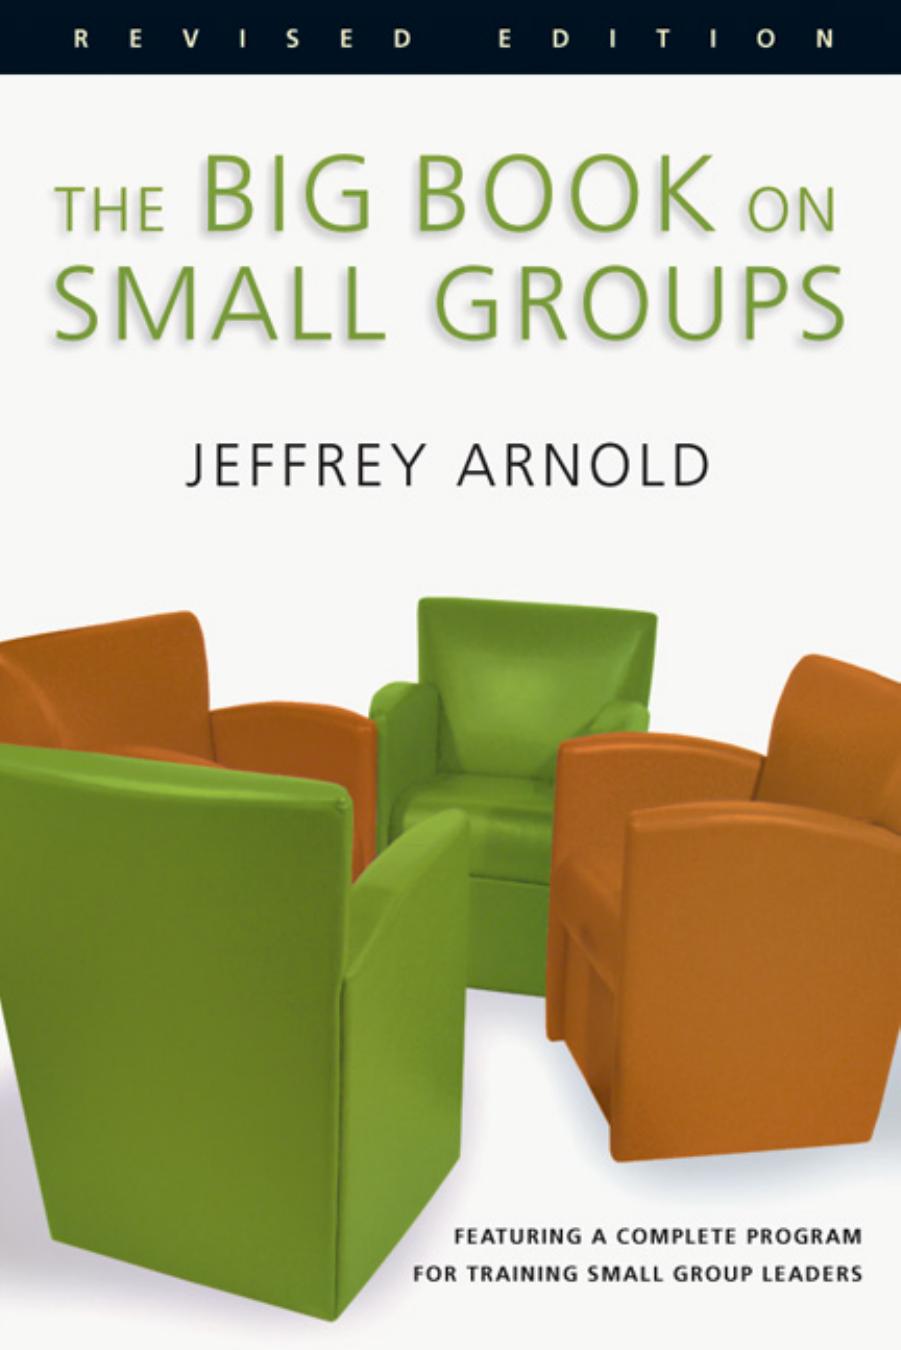 The Big Book on Small Groups by Jeffrey Arnold